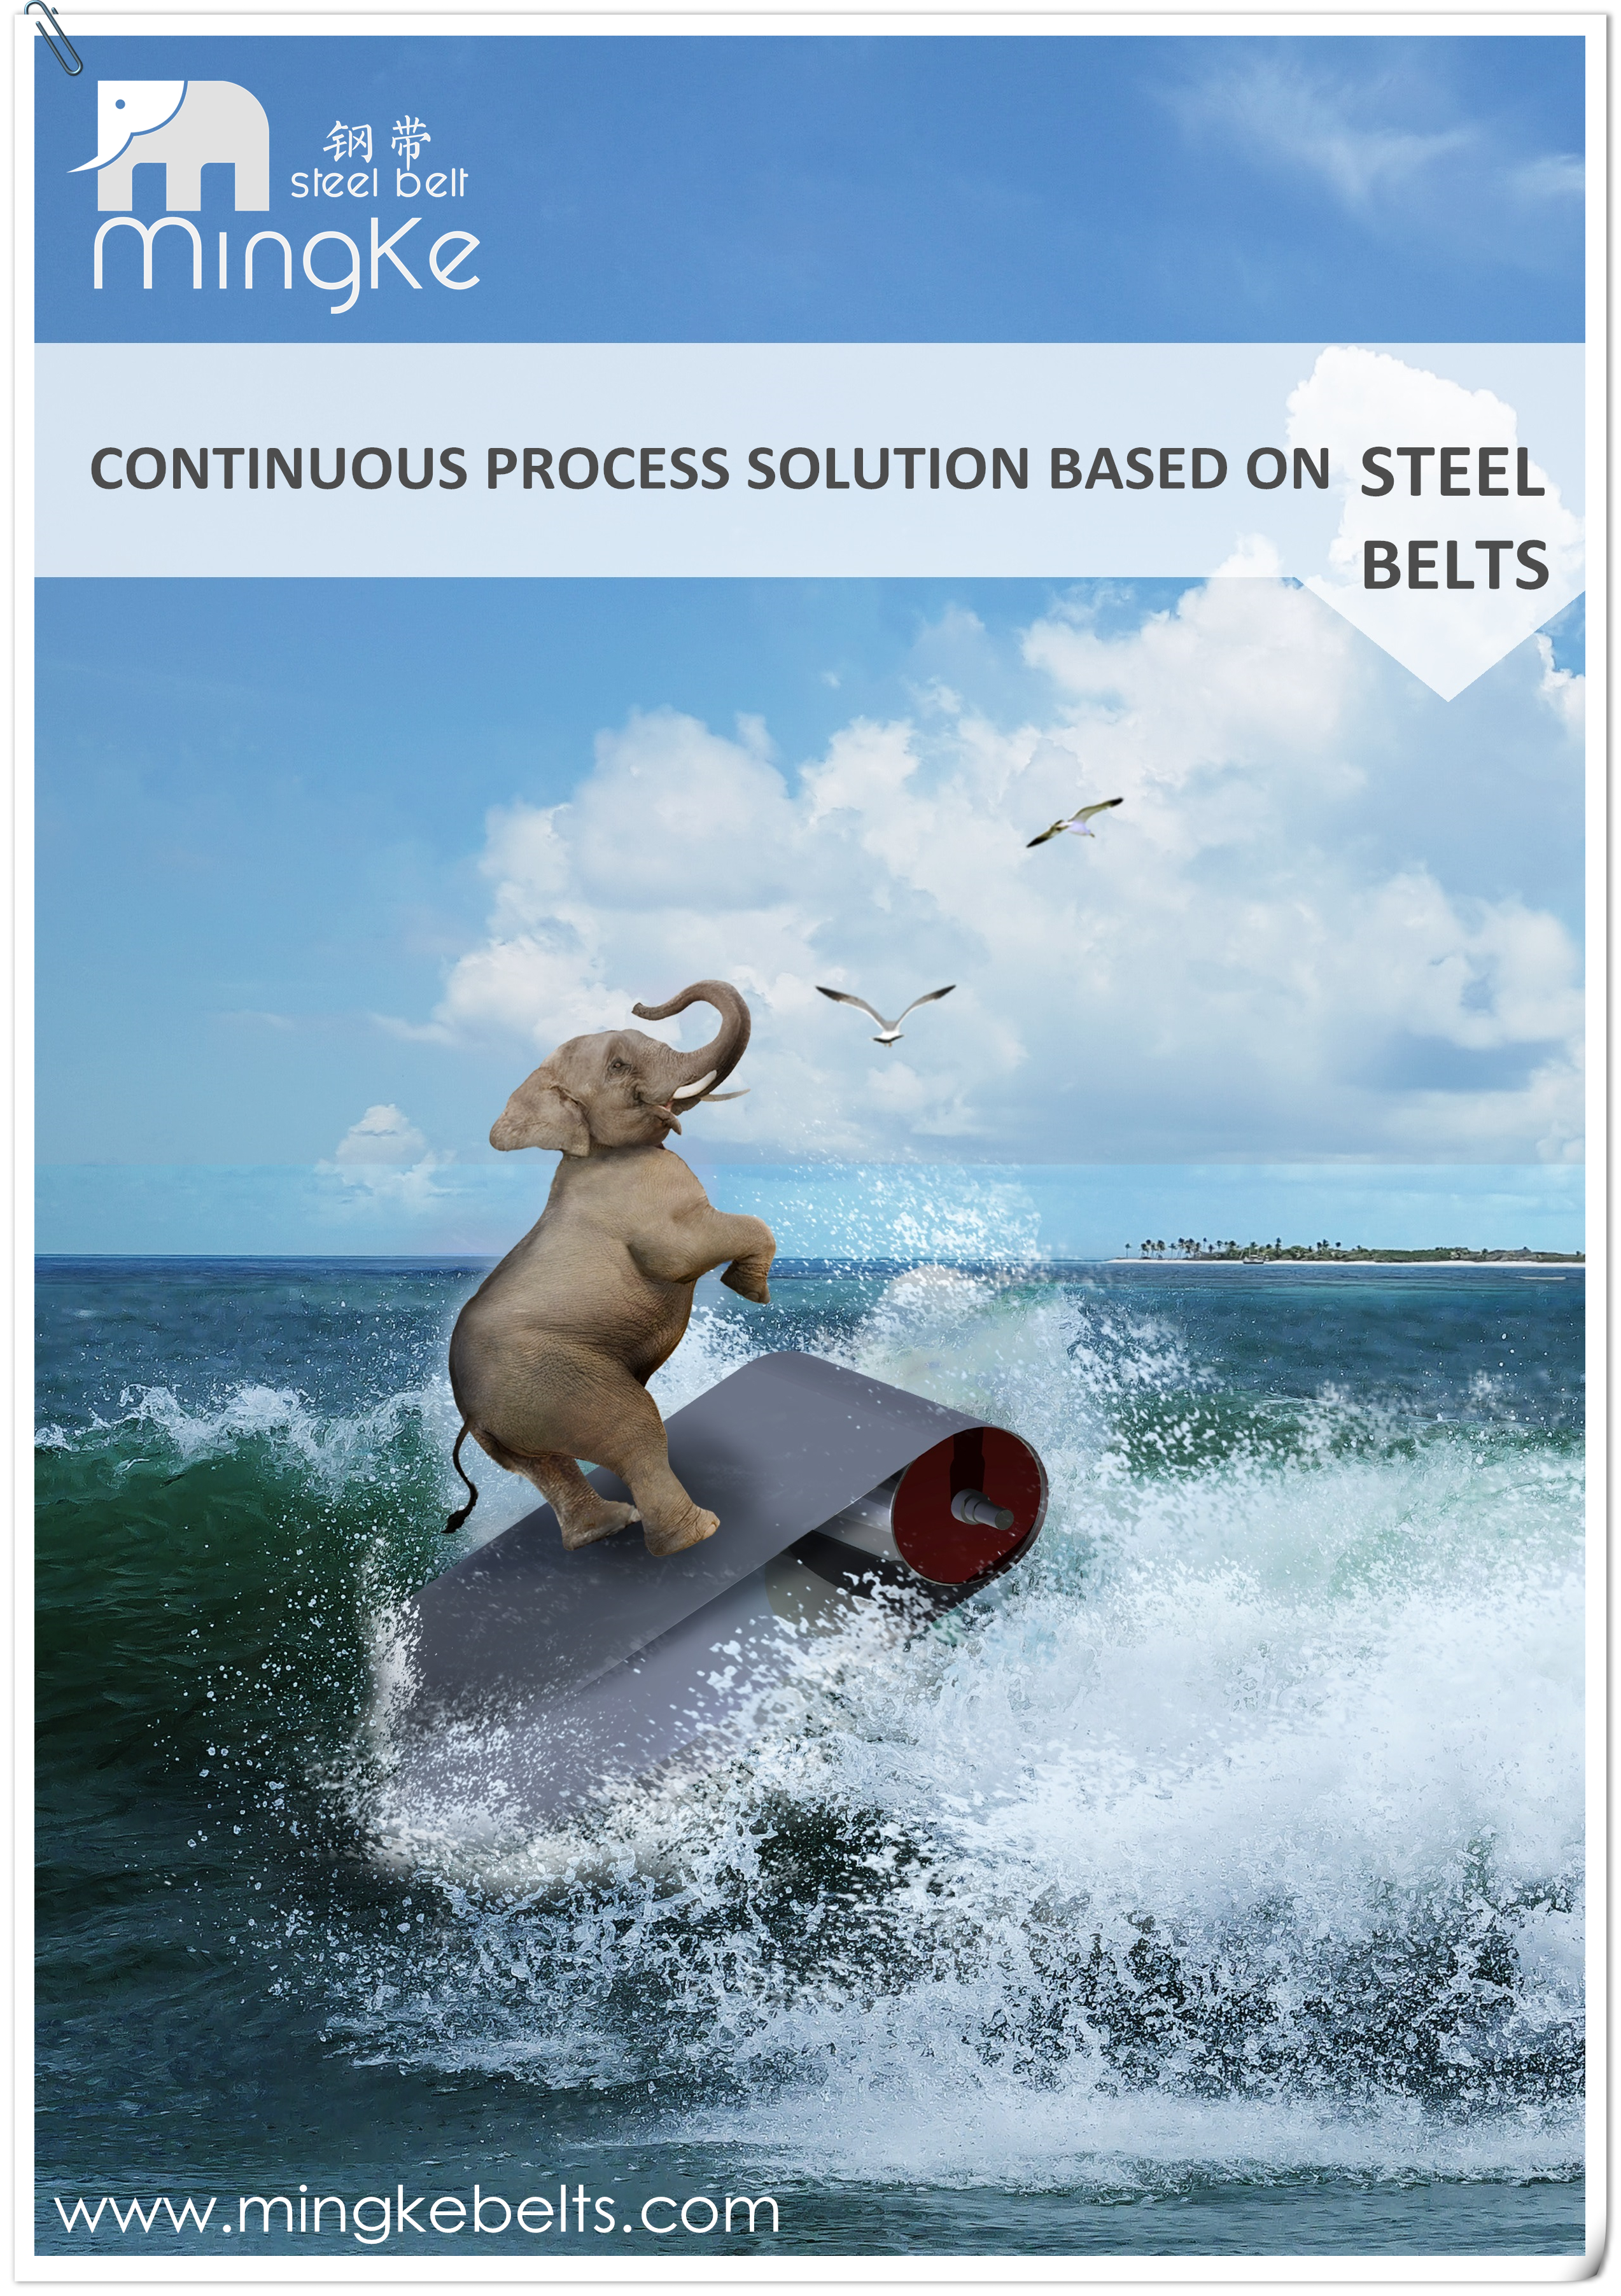 Continuous-Process-Solution-Based-on-Steel-Belts1